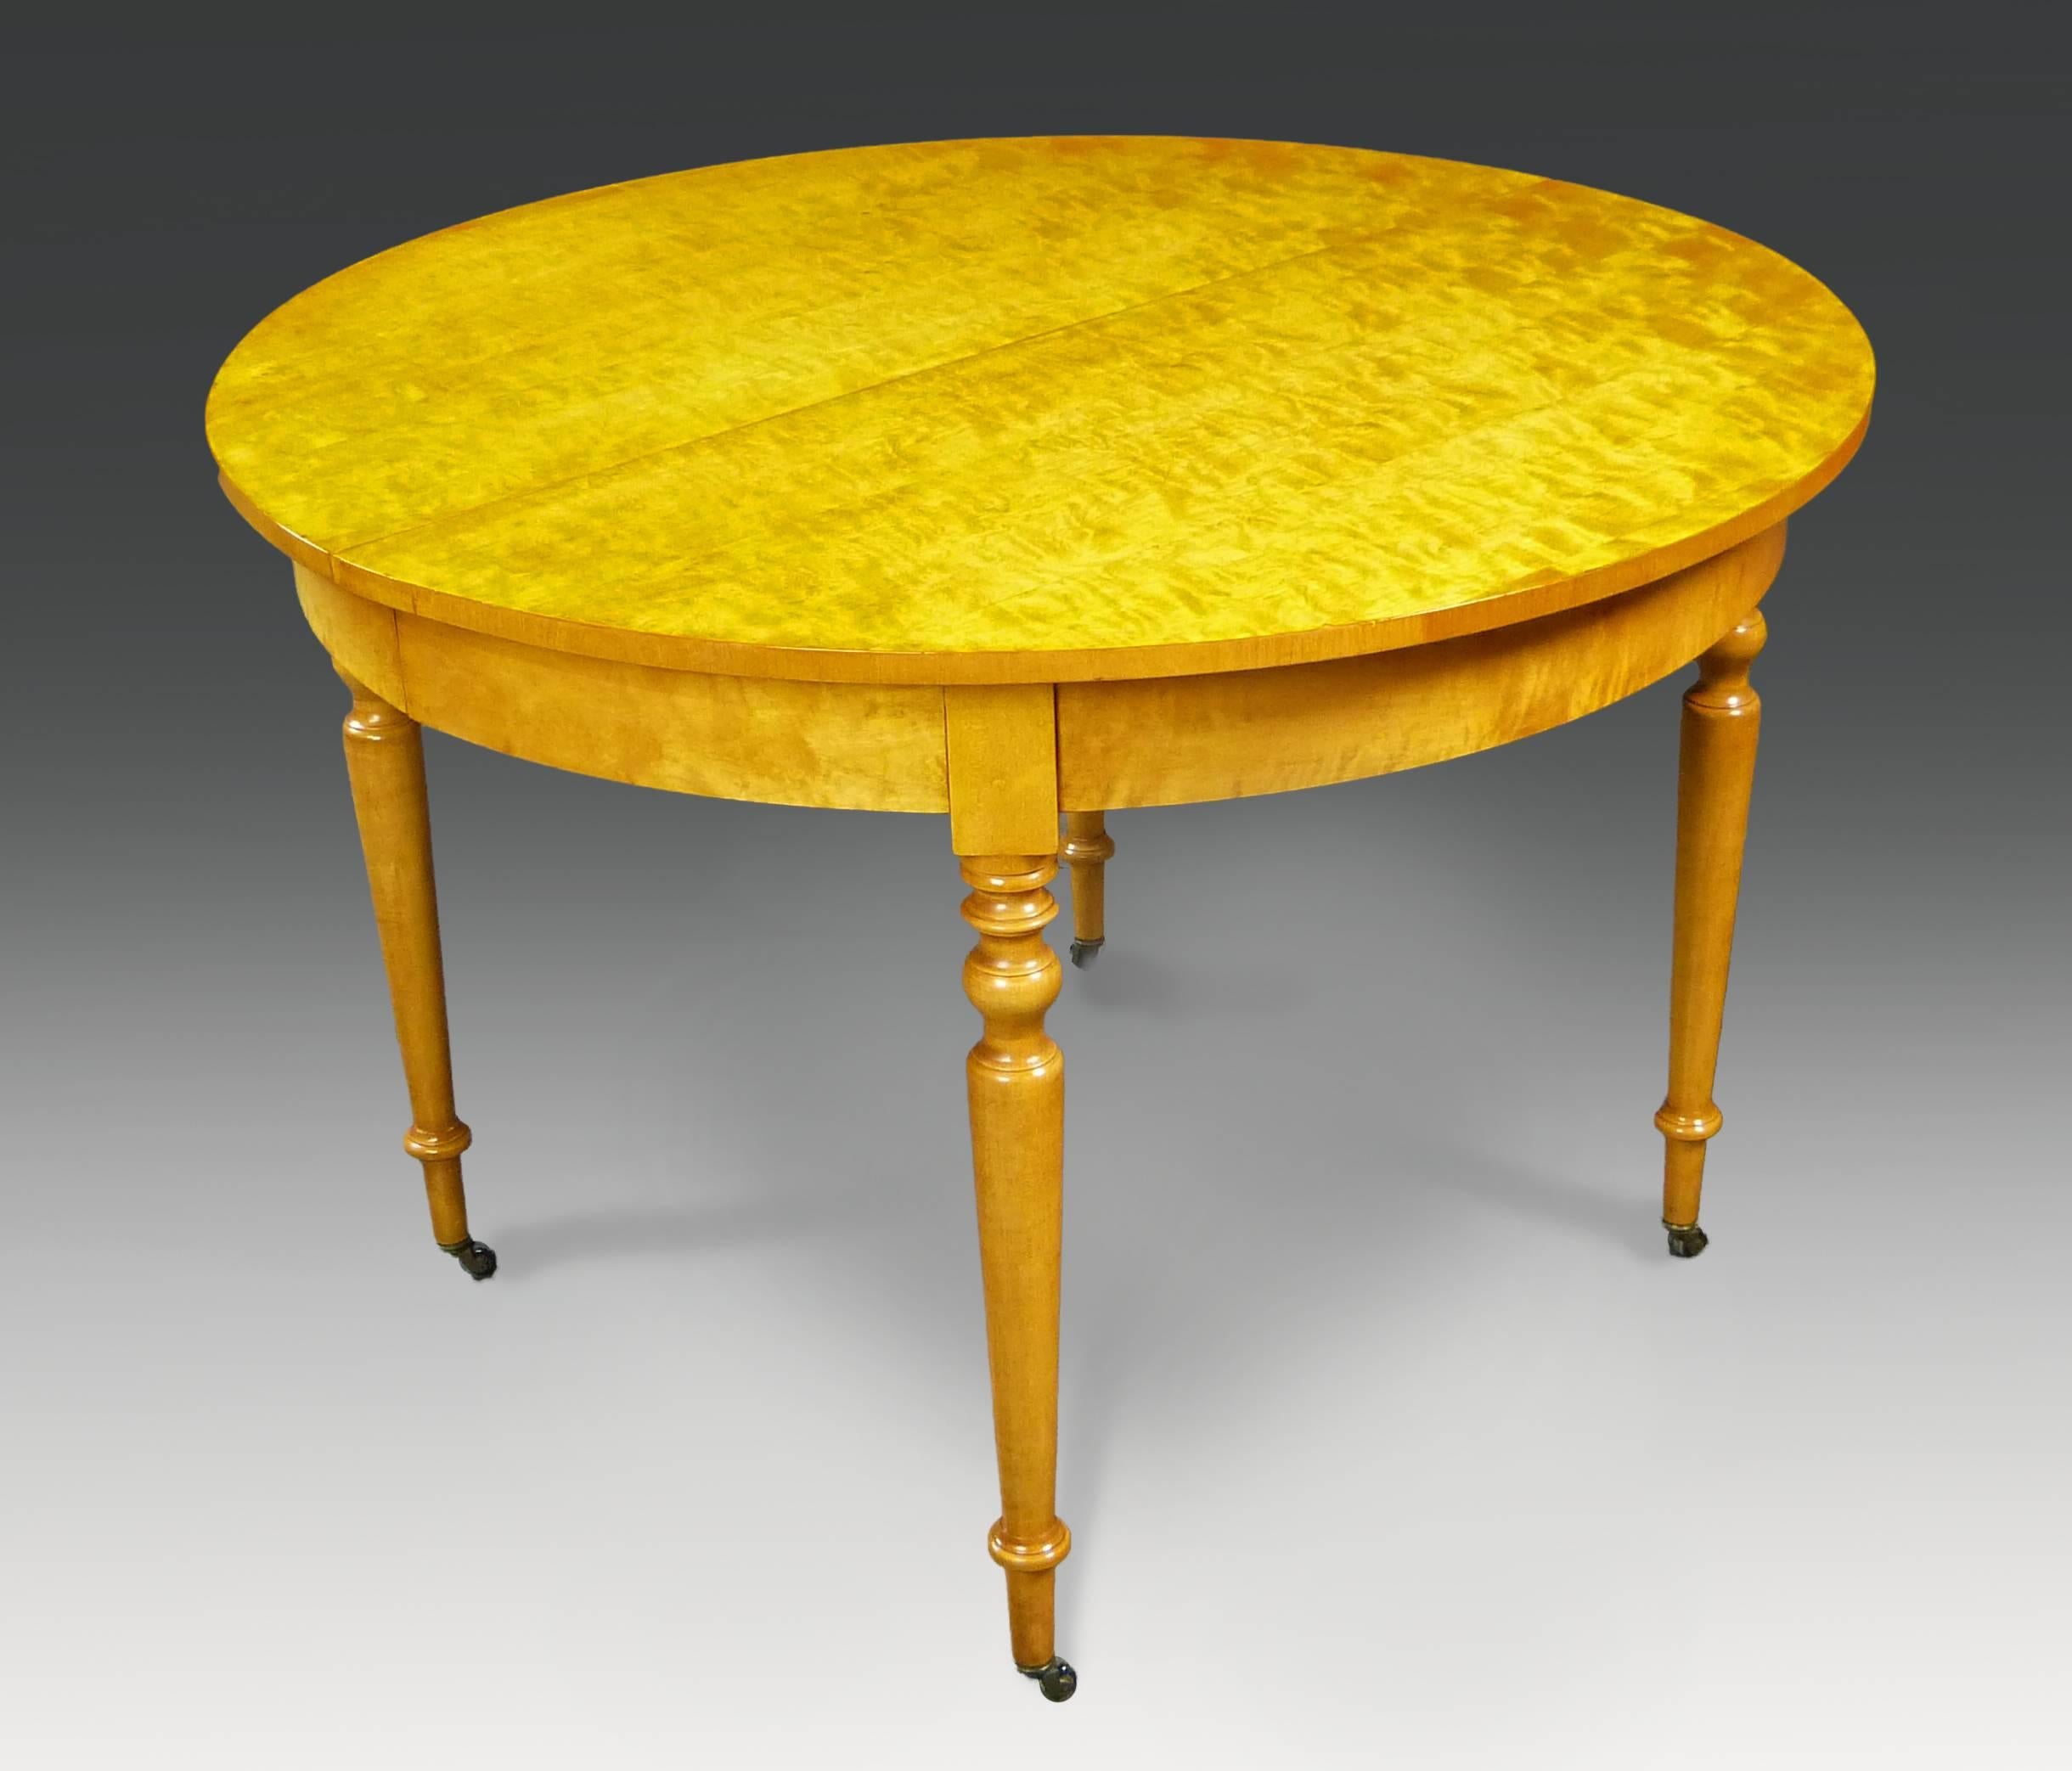 Attractive end of 19th century Biedermeier Revival circular dining table with two skirted extension leaves. It is made of fine quilted birchwood veneers with four finely turned solid birchwood legs terminating in casters. The interior structure is